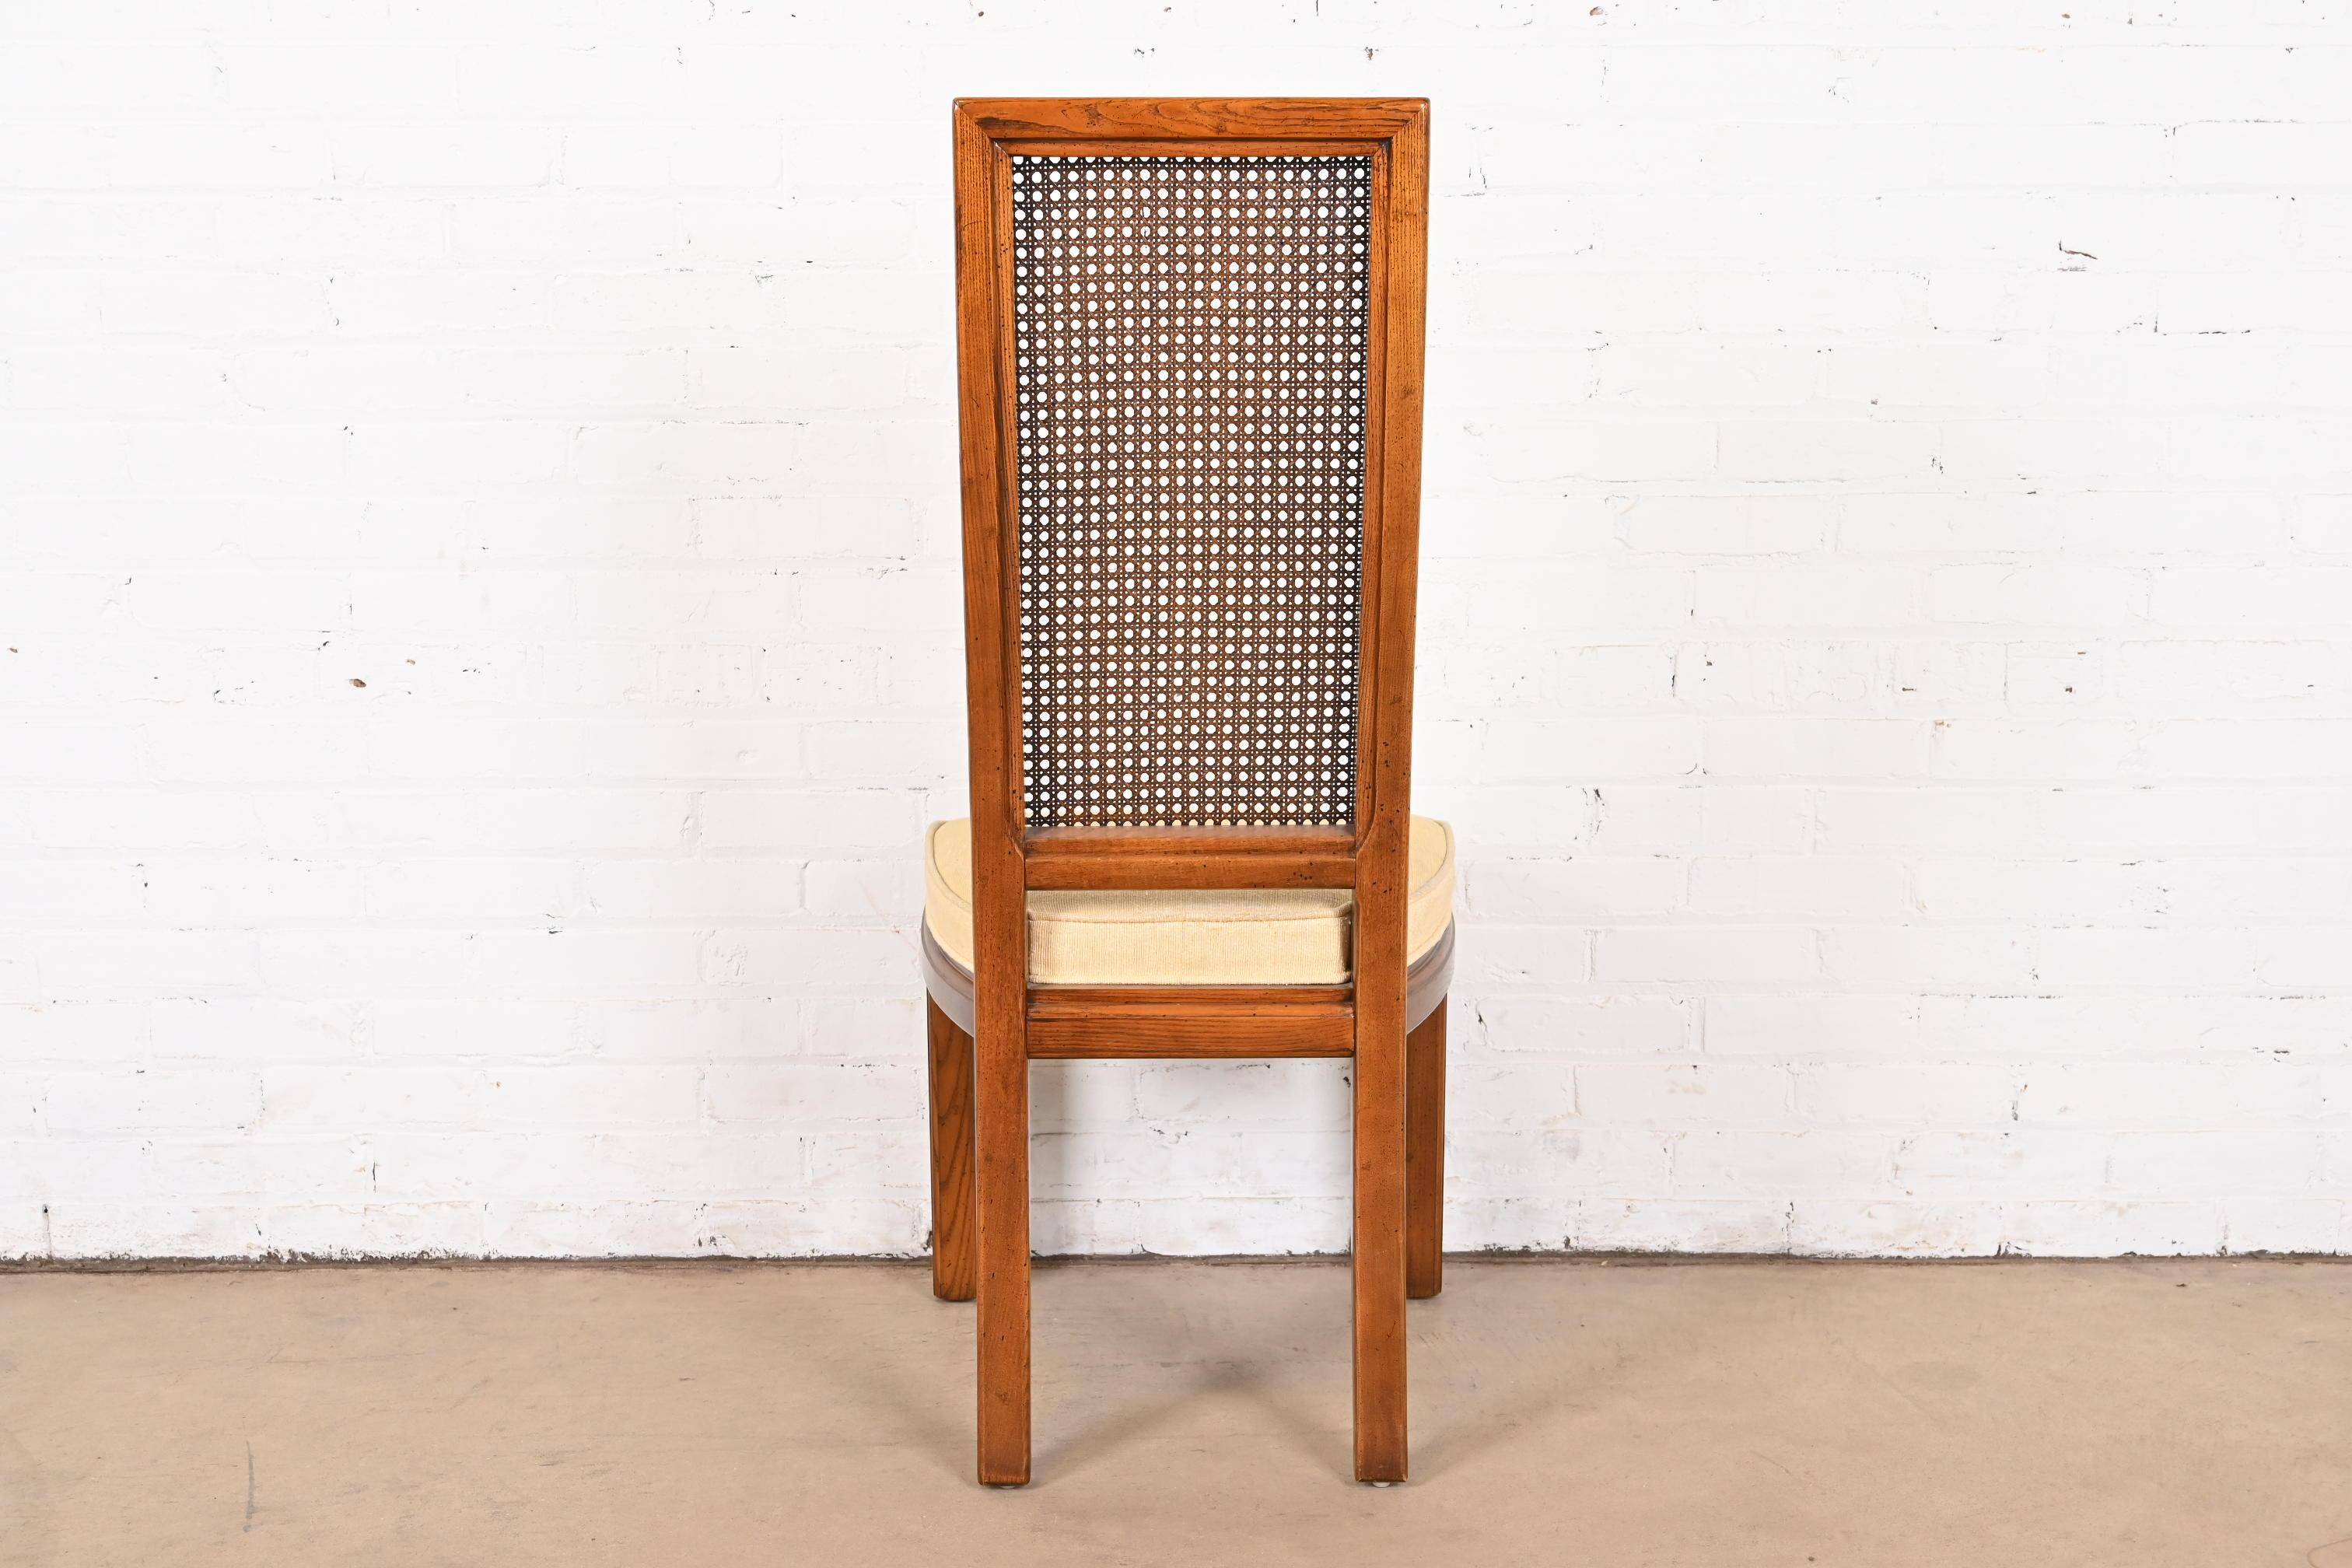 Henredon Mid-Century Modern Oak and Cane High Back Side Chair, Circa 1970s For Sale 5